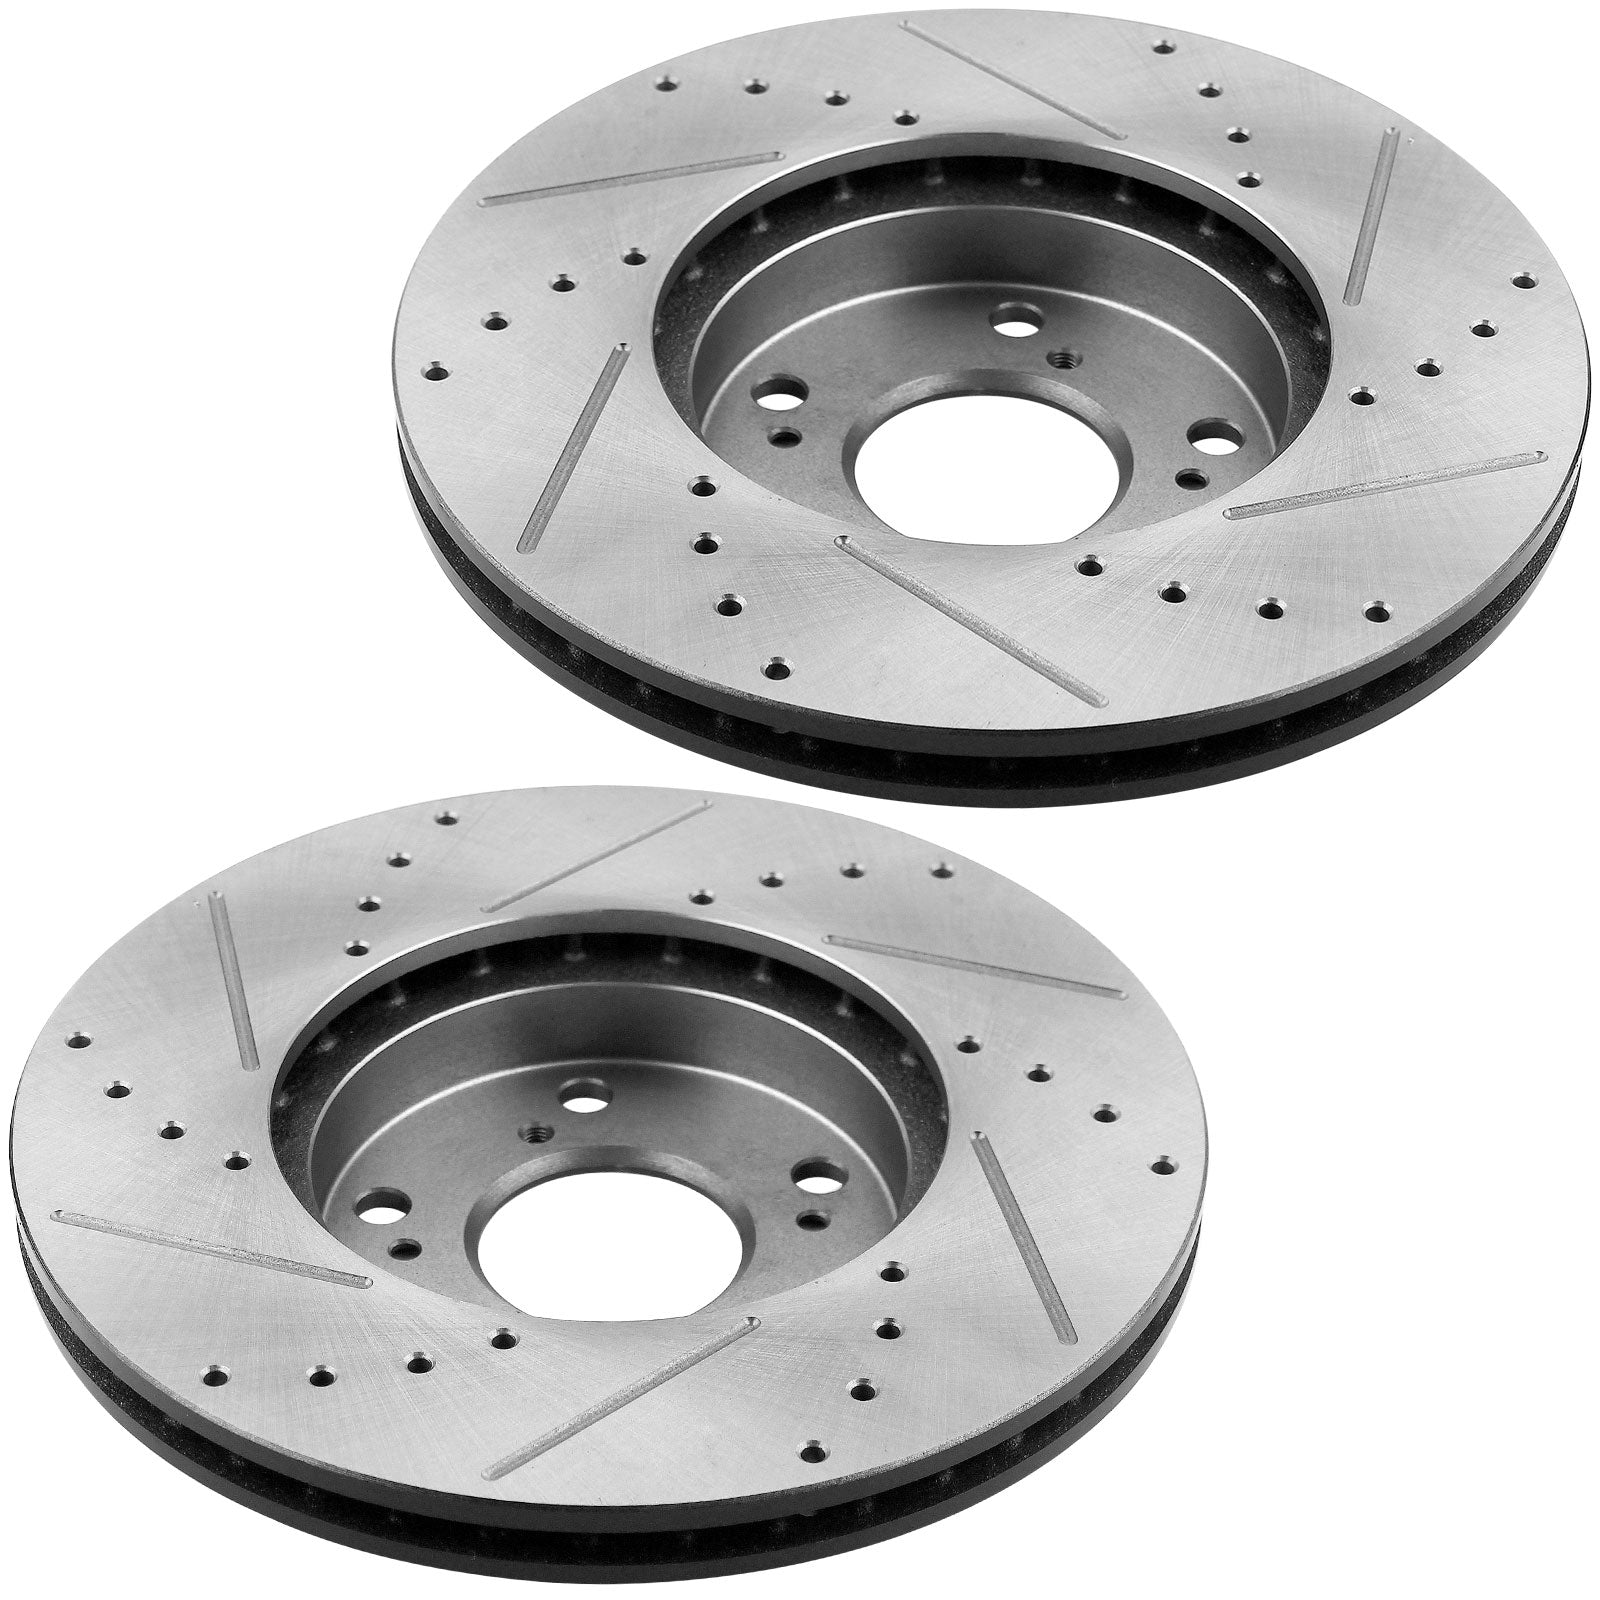 MMotorbyMotor Front Brake Rotors 282mm Drilled & Slotted Design Brake Rotor & Brake Pad kit Including CLEANER DOT4 FLUID Fits for Acura ILX, Honda Civic Accord Element CR-V MotorbyMotor